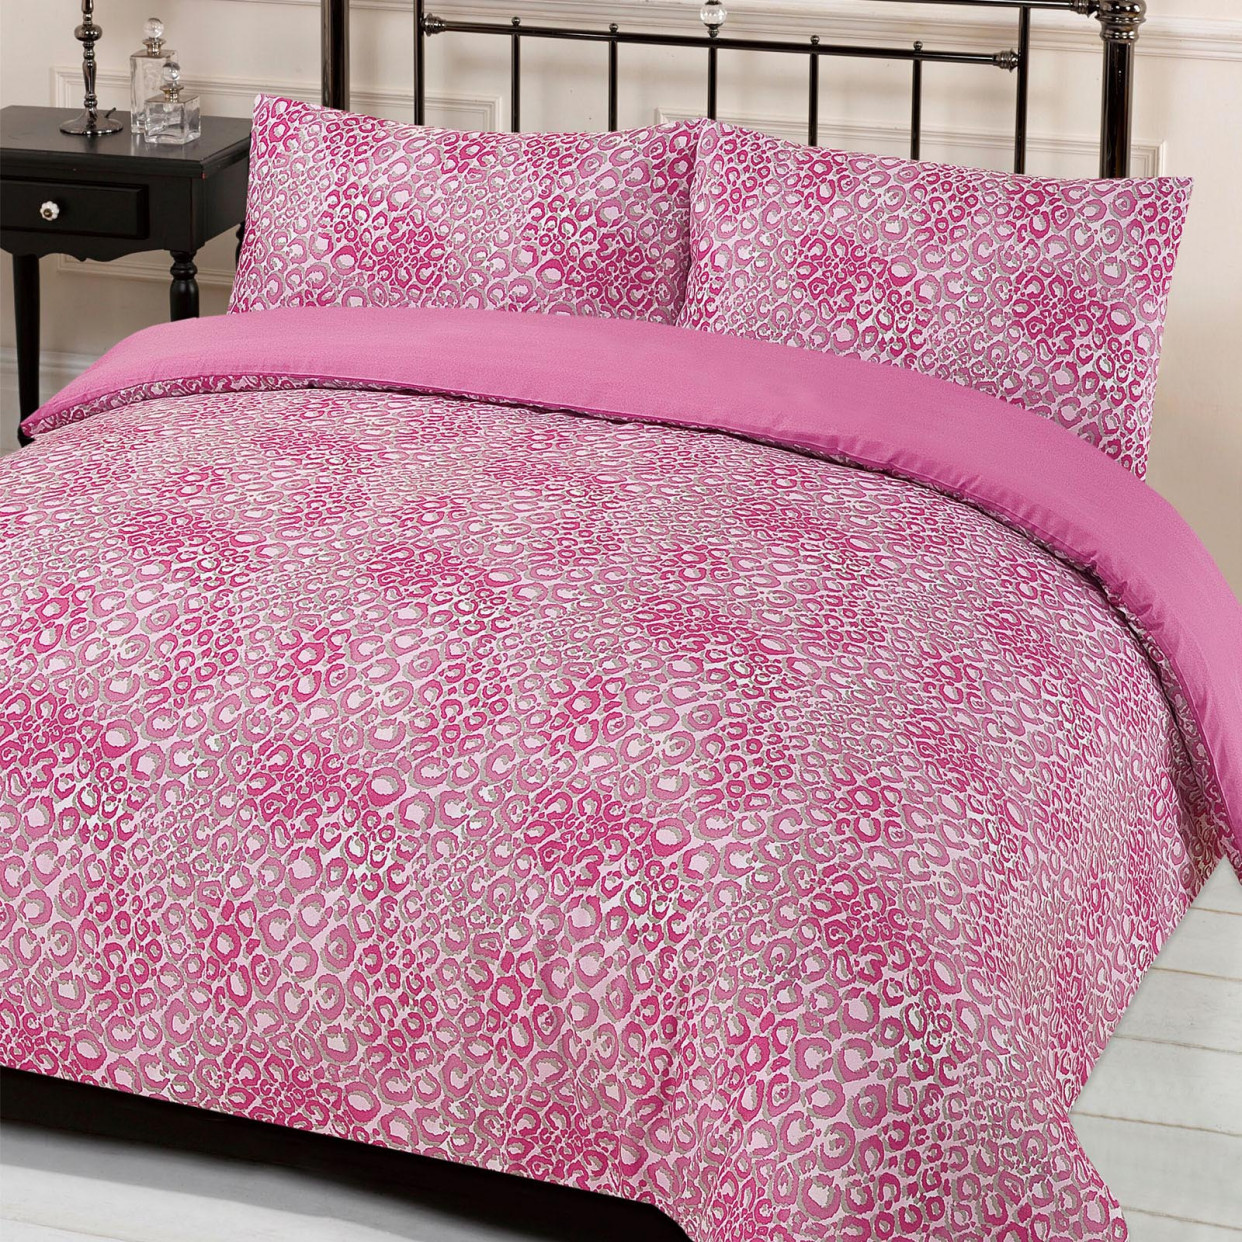 Leopard Print Quilt Cover with Pillowcase Bedding Set Jengo Pink - King>